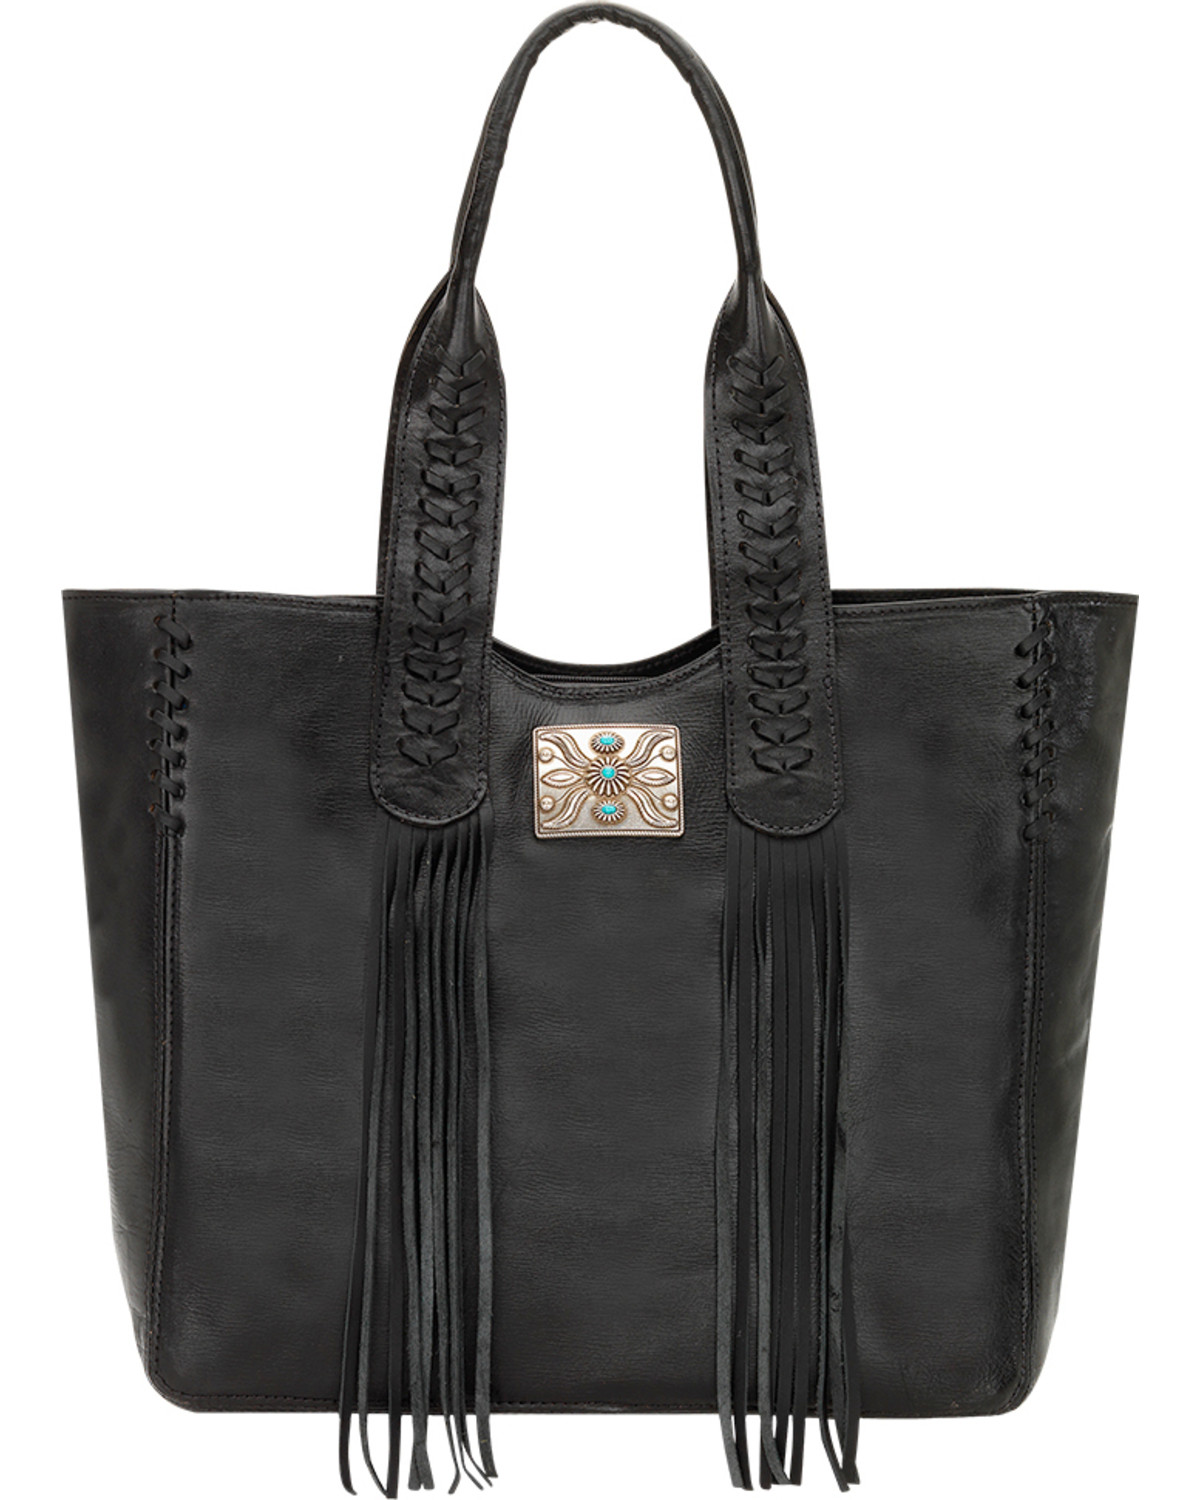 American West Black Mojave Canyon Large Zip Top Tote